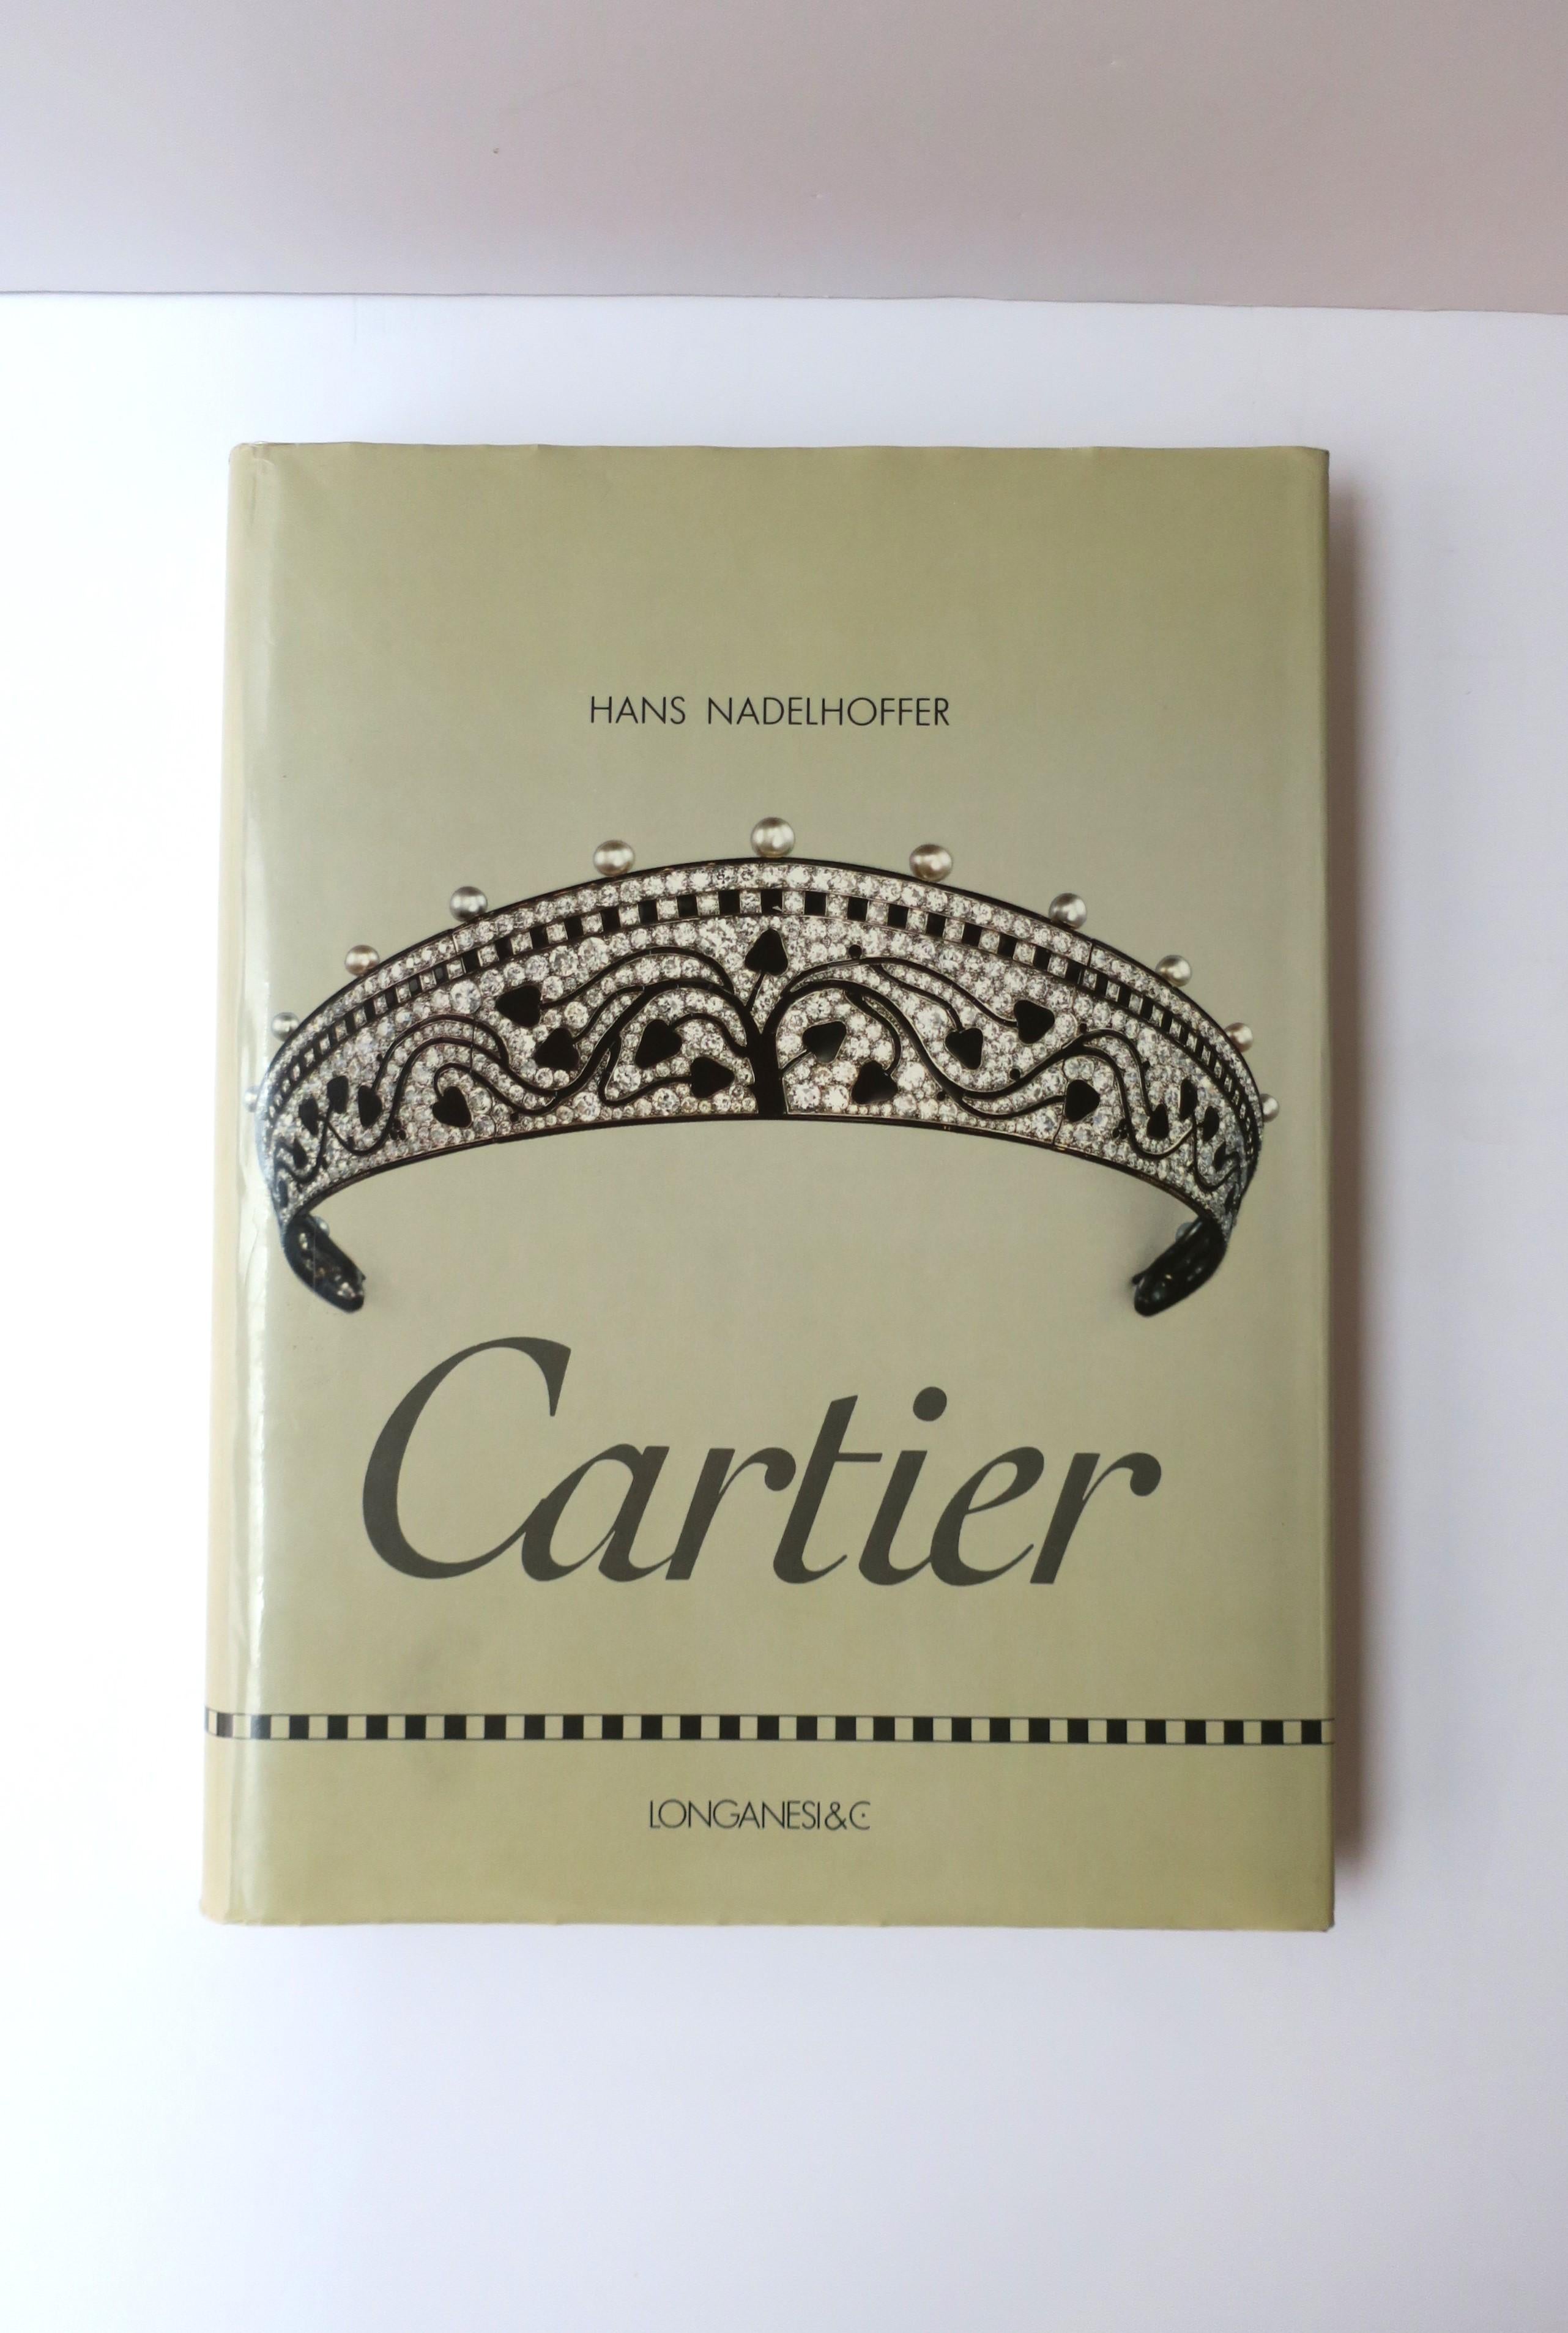 A very beautiful hard-cover Cartier High Jewelry coffee table book by Hans Nadelhoffer, 1984. Book showcases royal and high jewelry, timepieces, and precious objects, covering various design styles such as the Art Deco period and more. A great piece